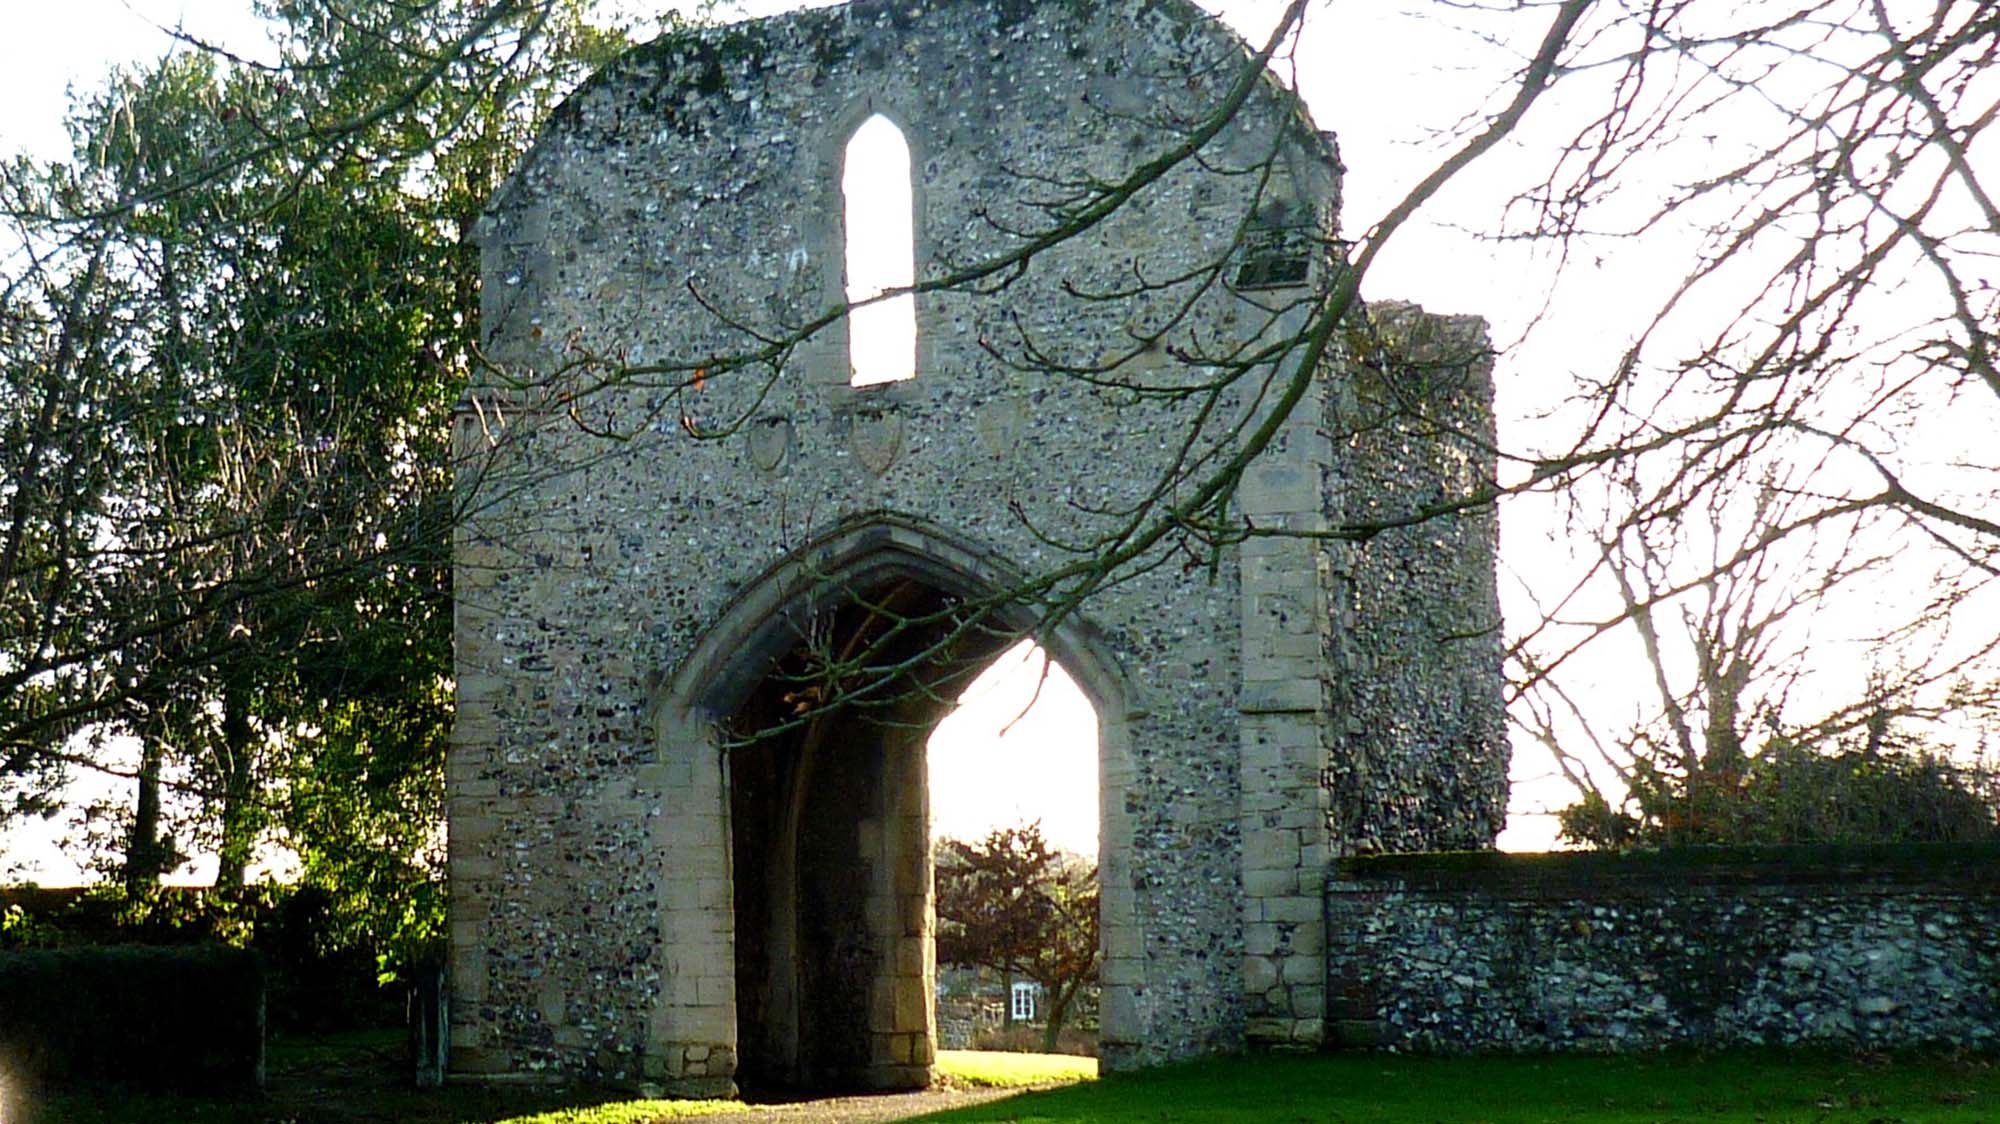 West Acre Priory gatehouse